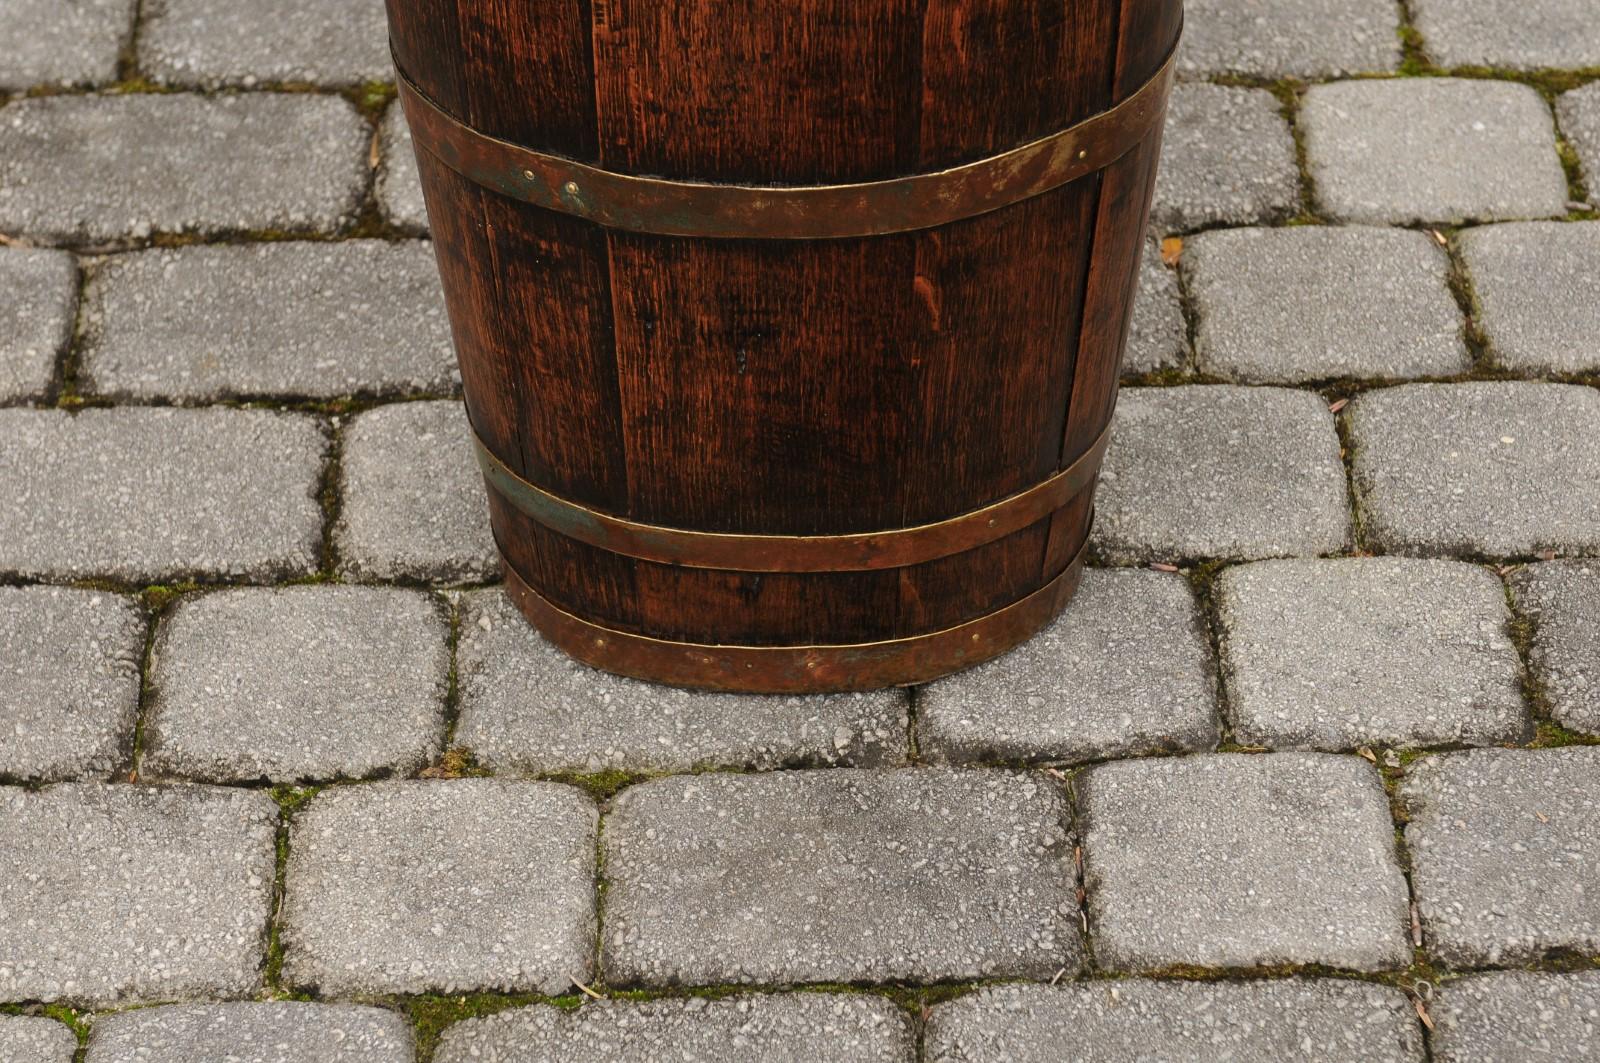 English Slender Rustic Oak Barrel with Brass Braces from the Turn of the Century 2